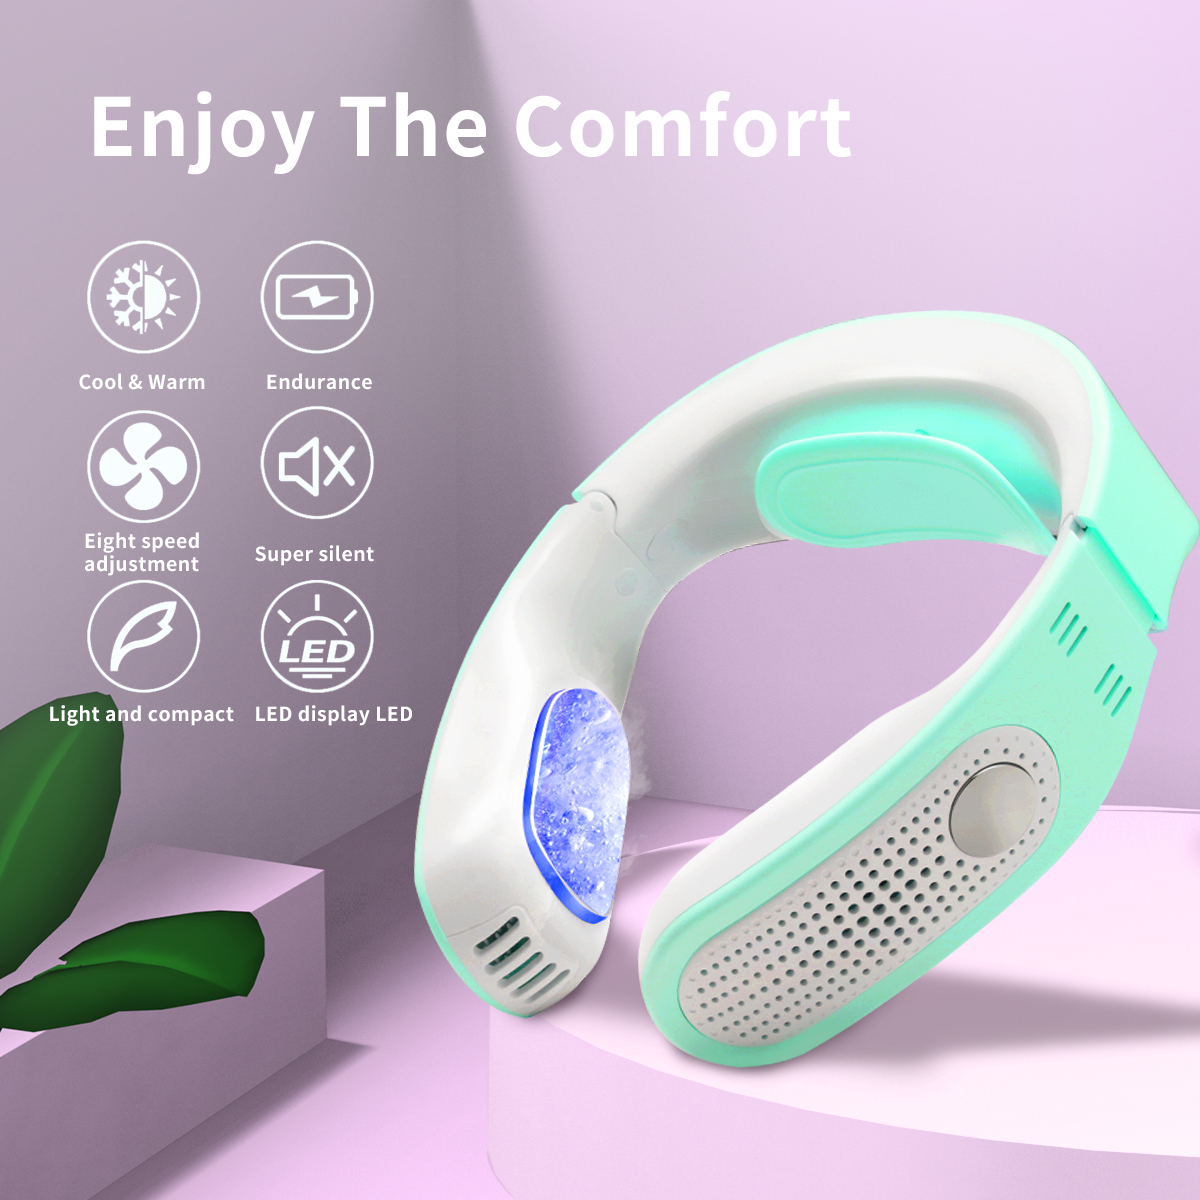 ALLKEI Brand New Mini Leafless Neck Fan 2600mAh Battery Operated Outdoor Sports Cooling Fans USB Neck Cooler And Heater Fan